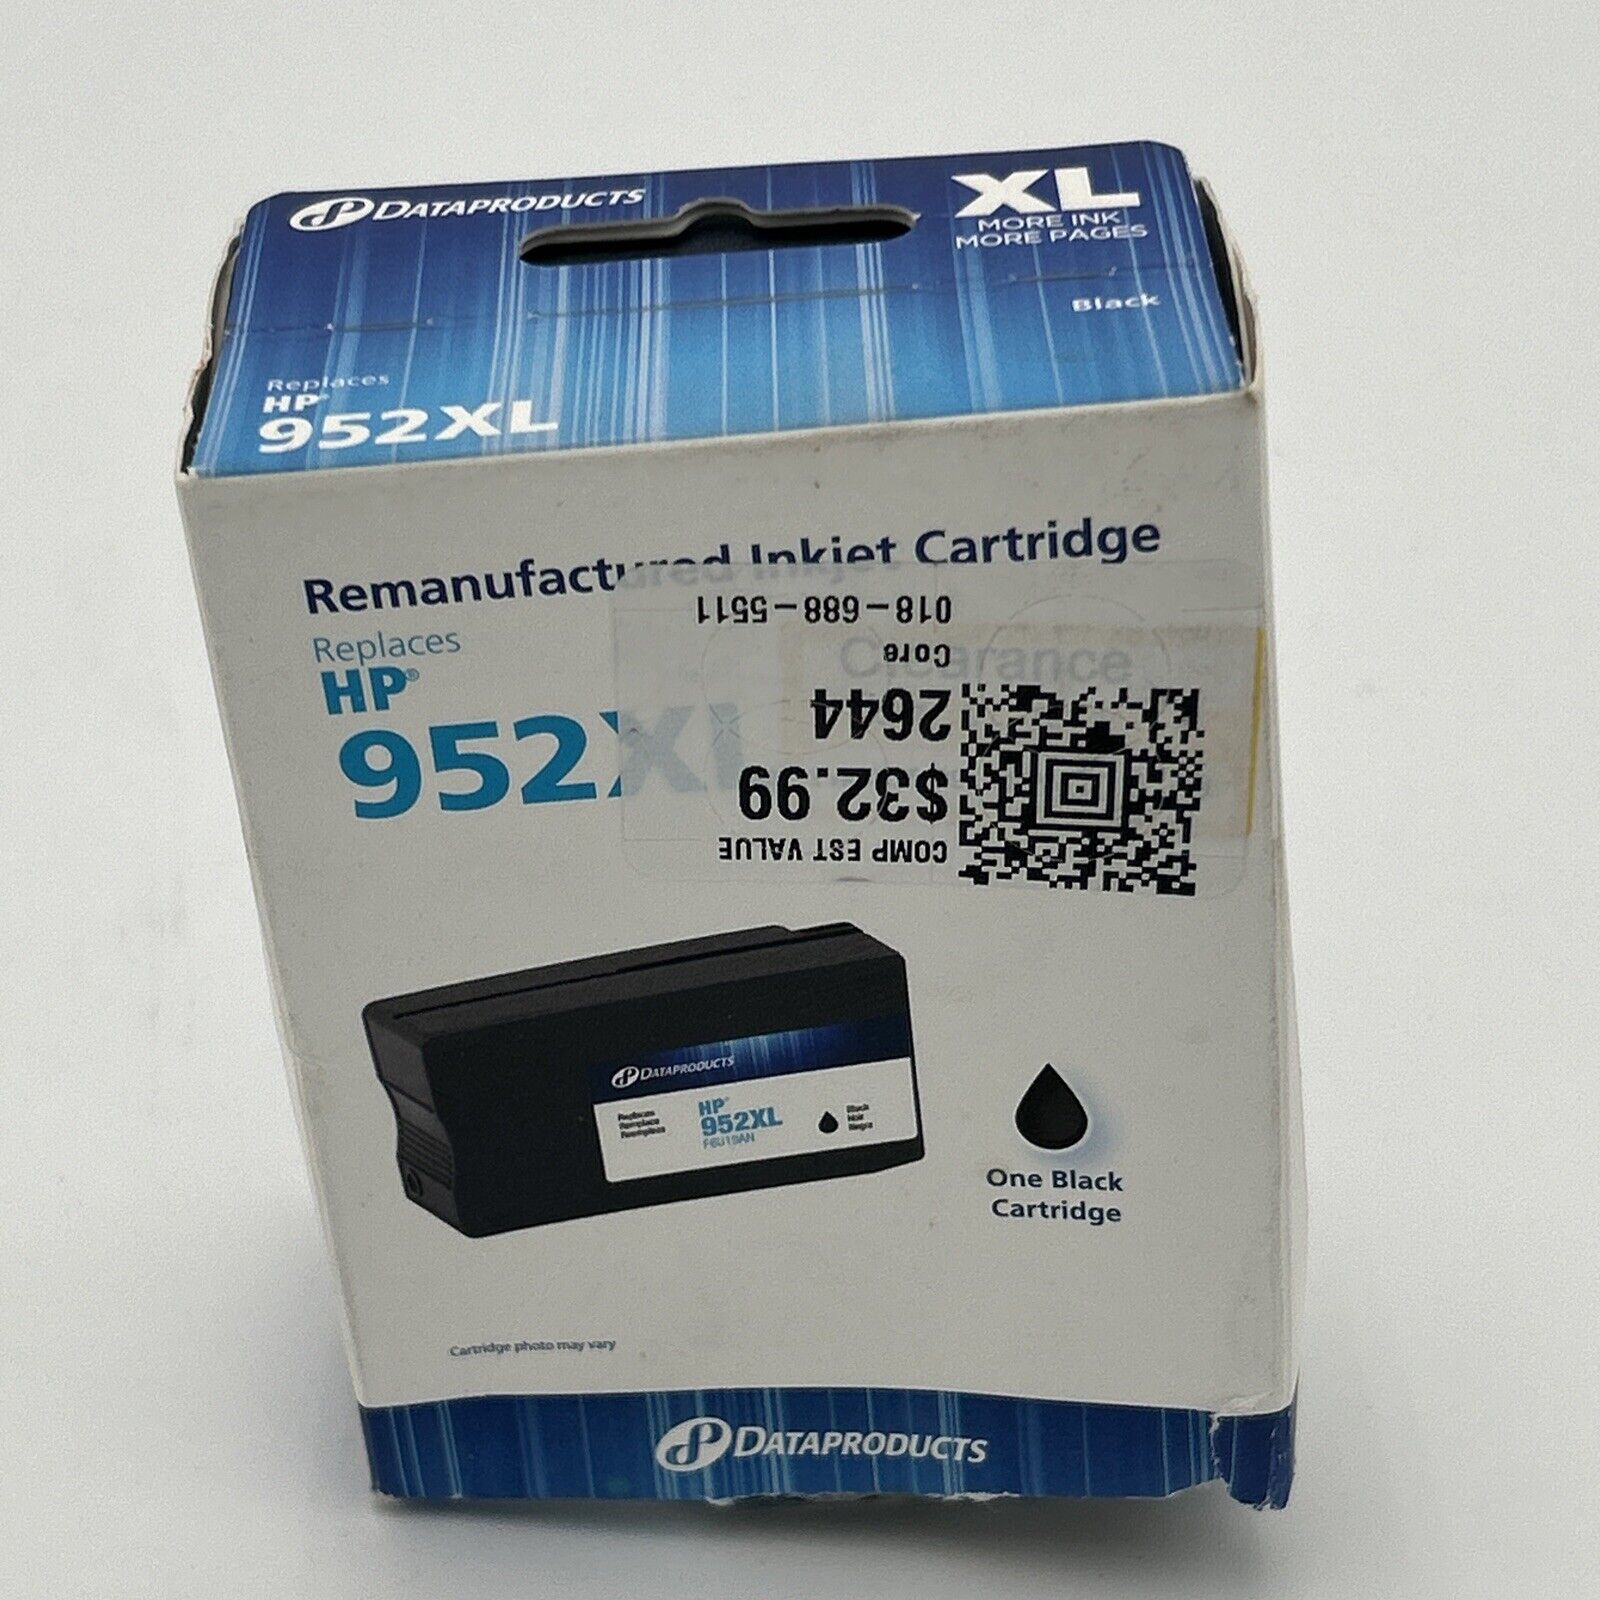 Dataproducts Black XL Single Ink Cartridge FOR HP 952XL Ink Series (F6U19)